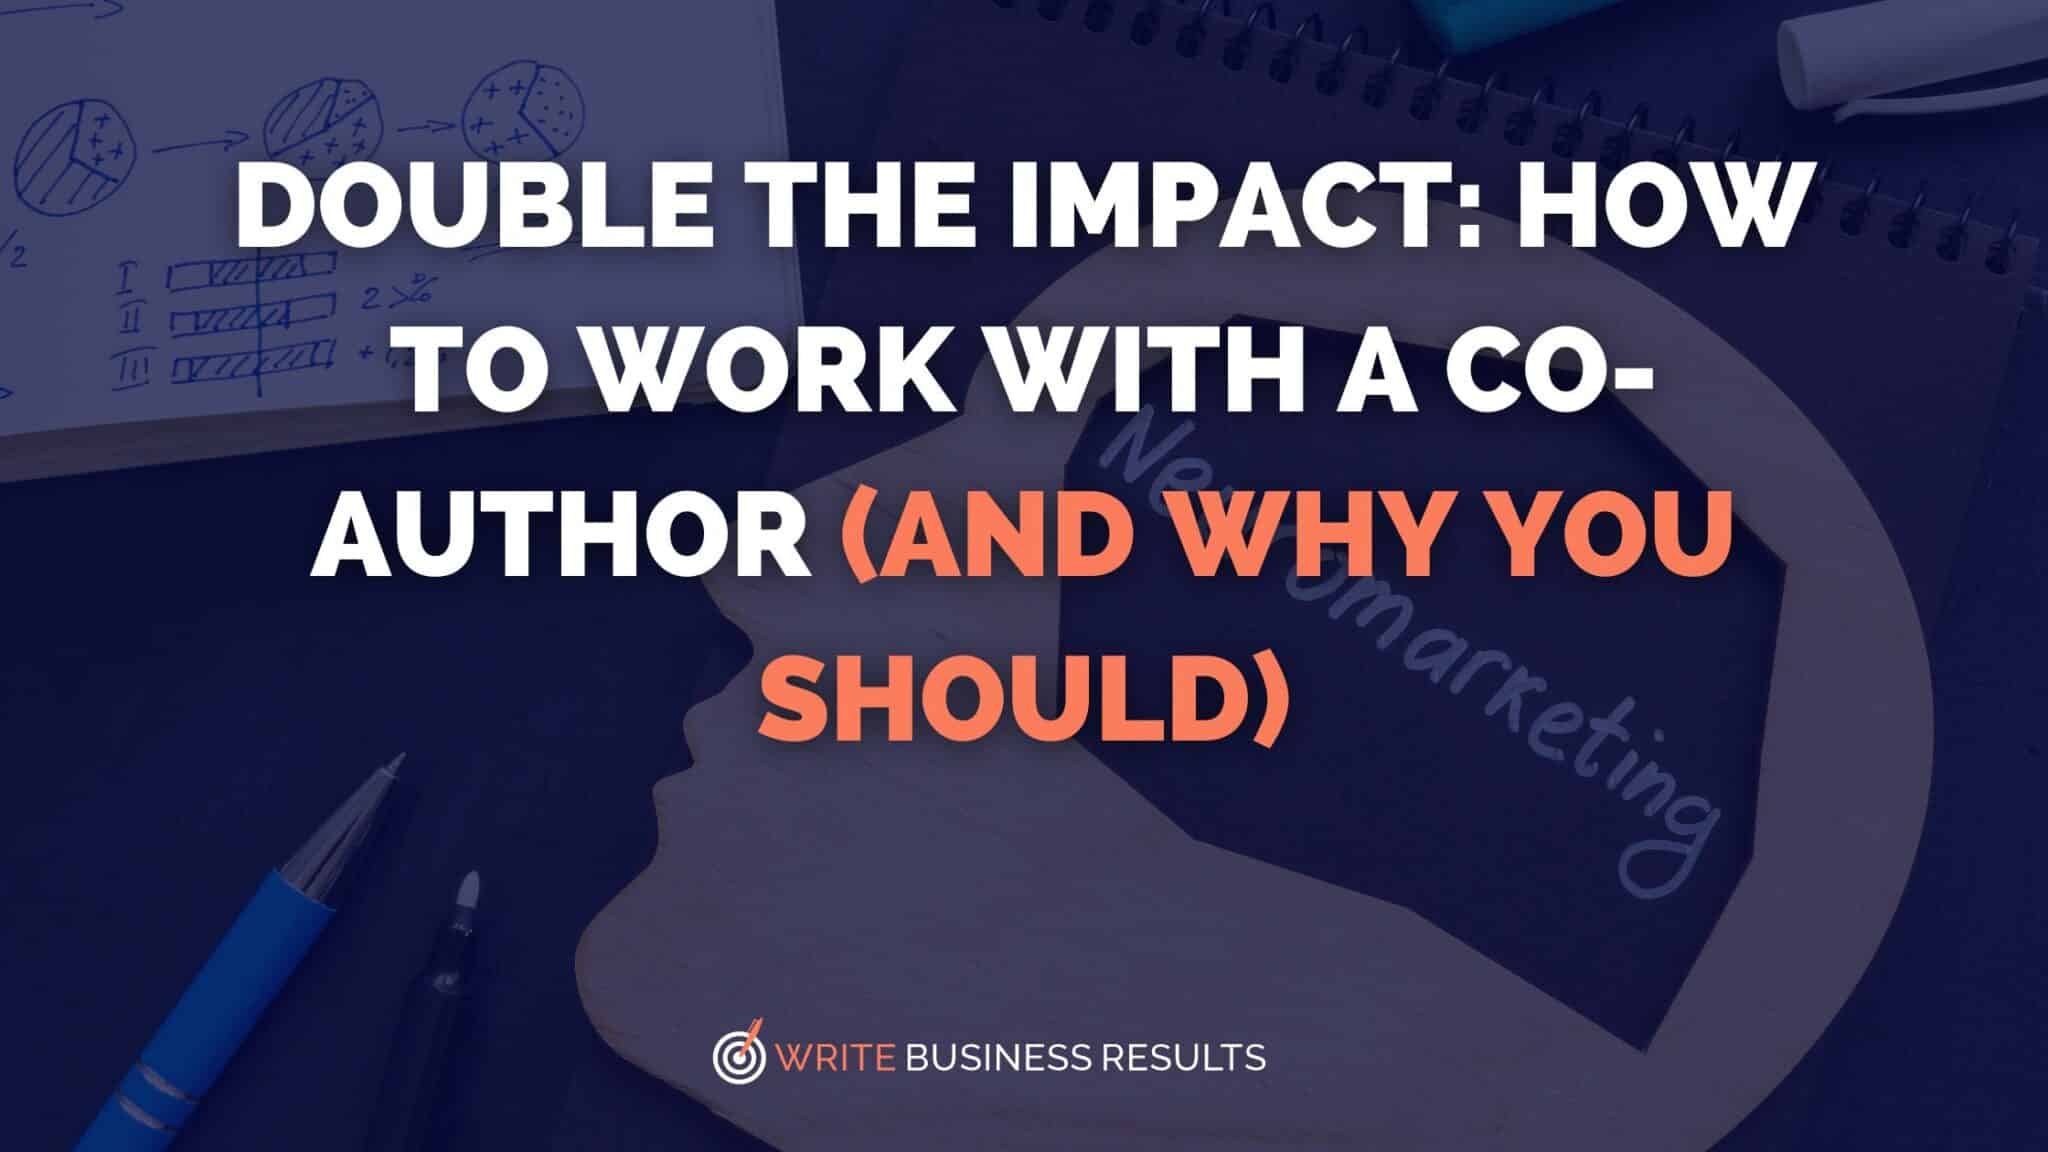 Double the Impact: How to Work With a Co-Author (and Why You Should)